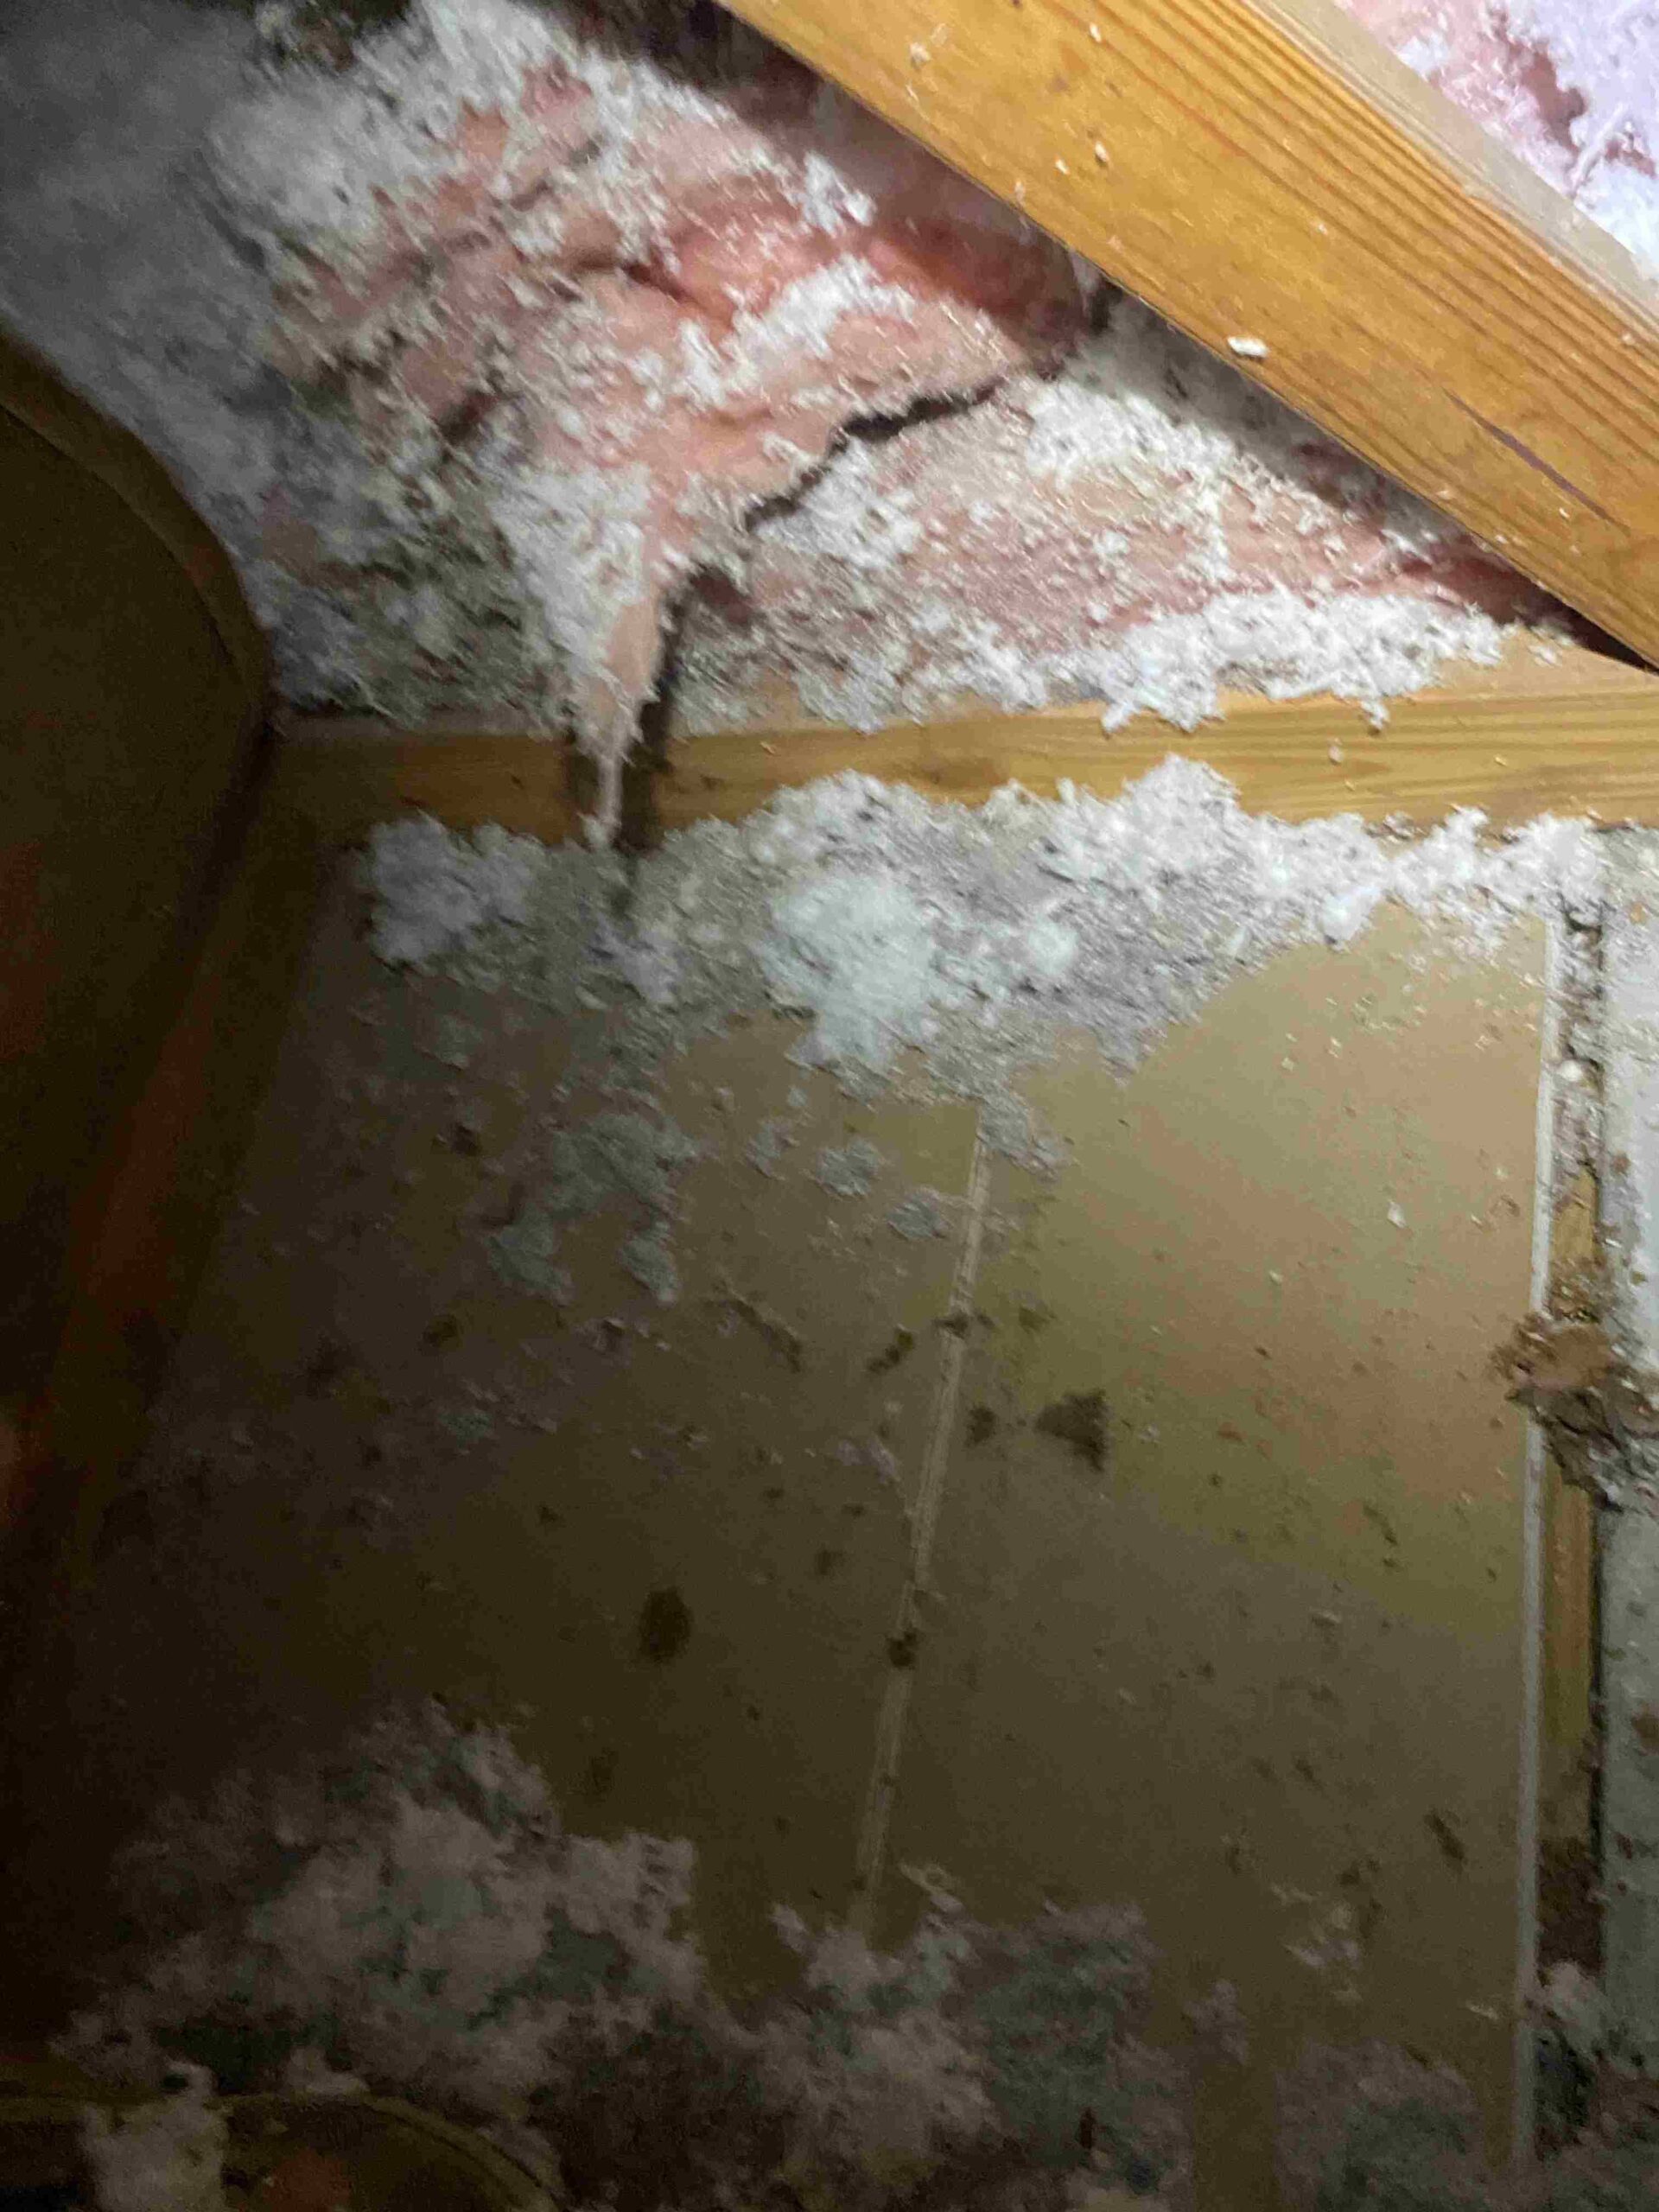 After discovering faulty insulation, one of our customers was forced to vacate their homes. However, we remedied the situation by removing the previously installed insulation from another company and successfully facilitated the return of our customers to their residences.